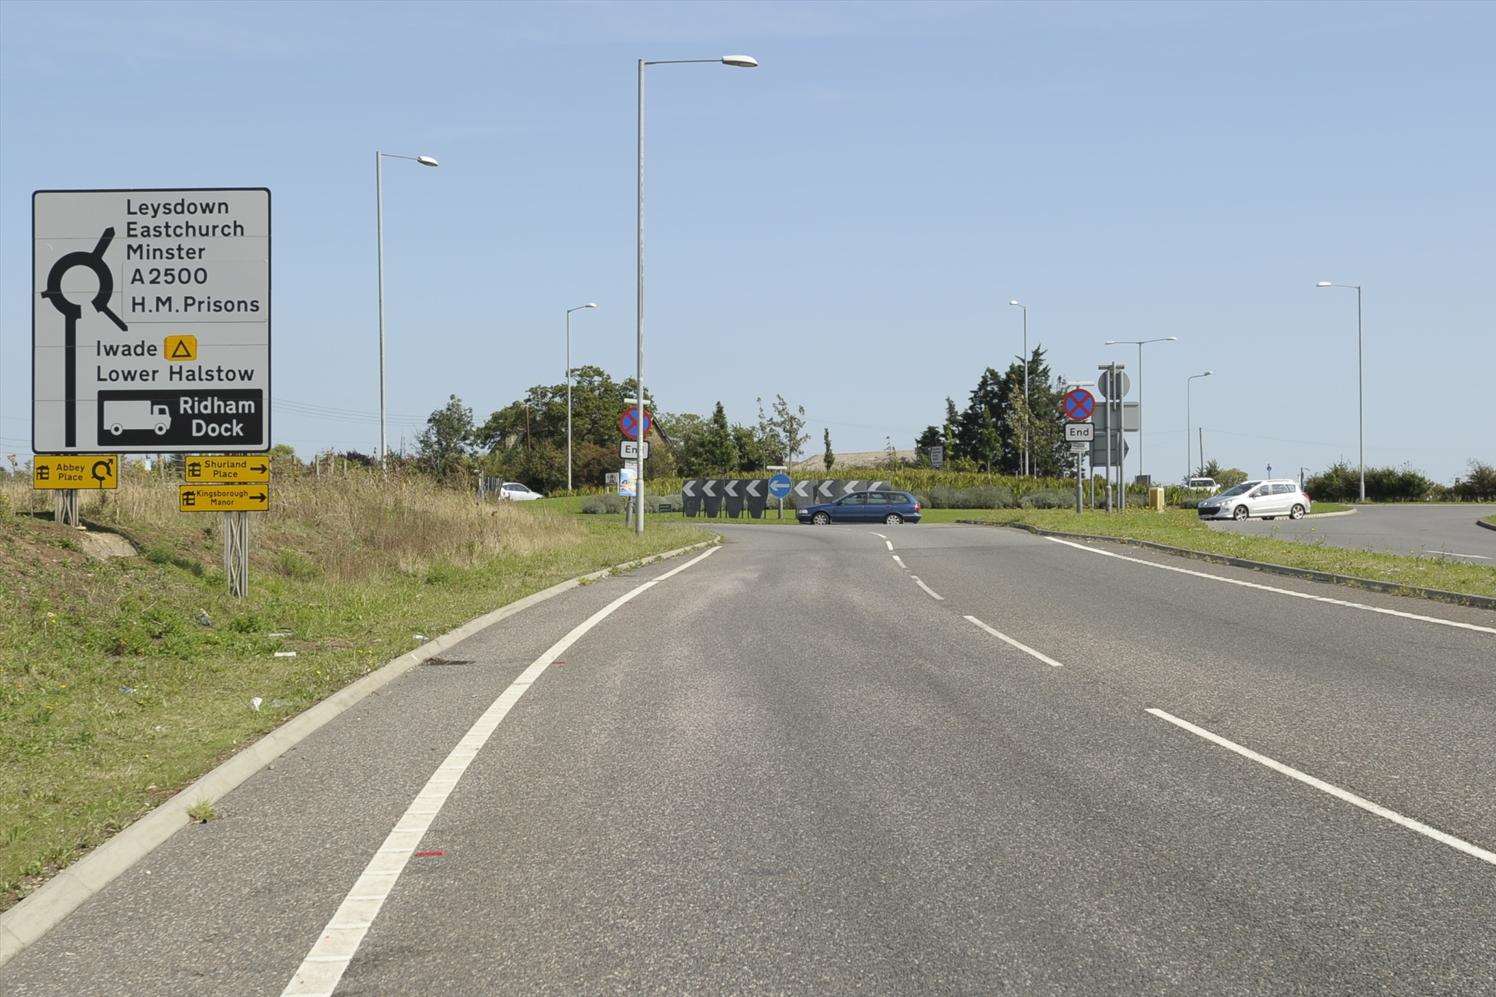 Views of roundabout and signage at Cowstead Corner